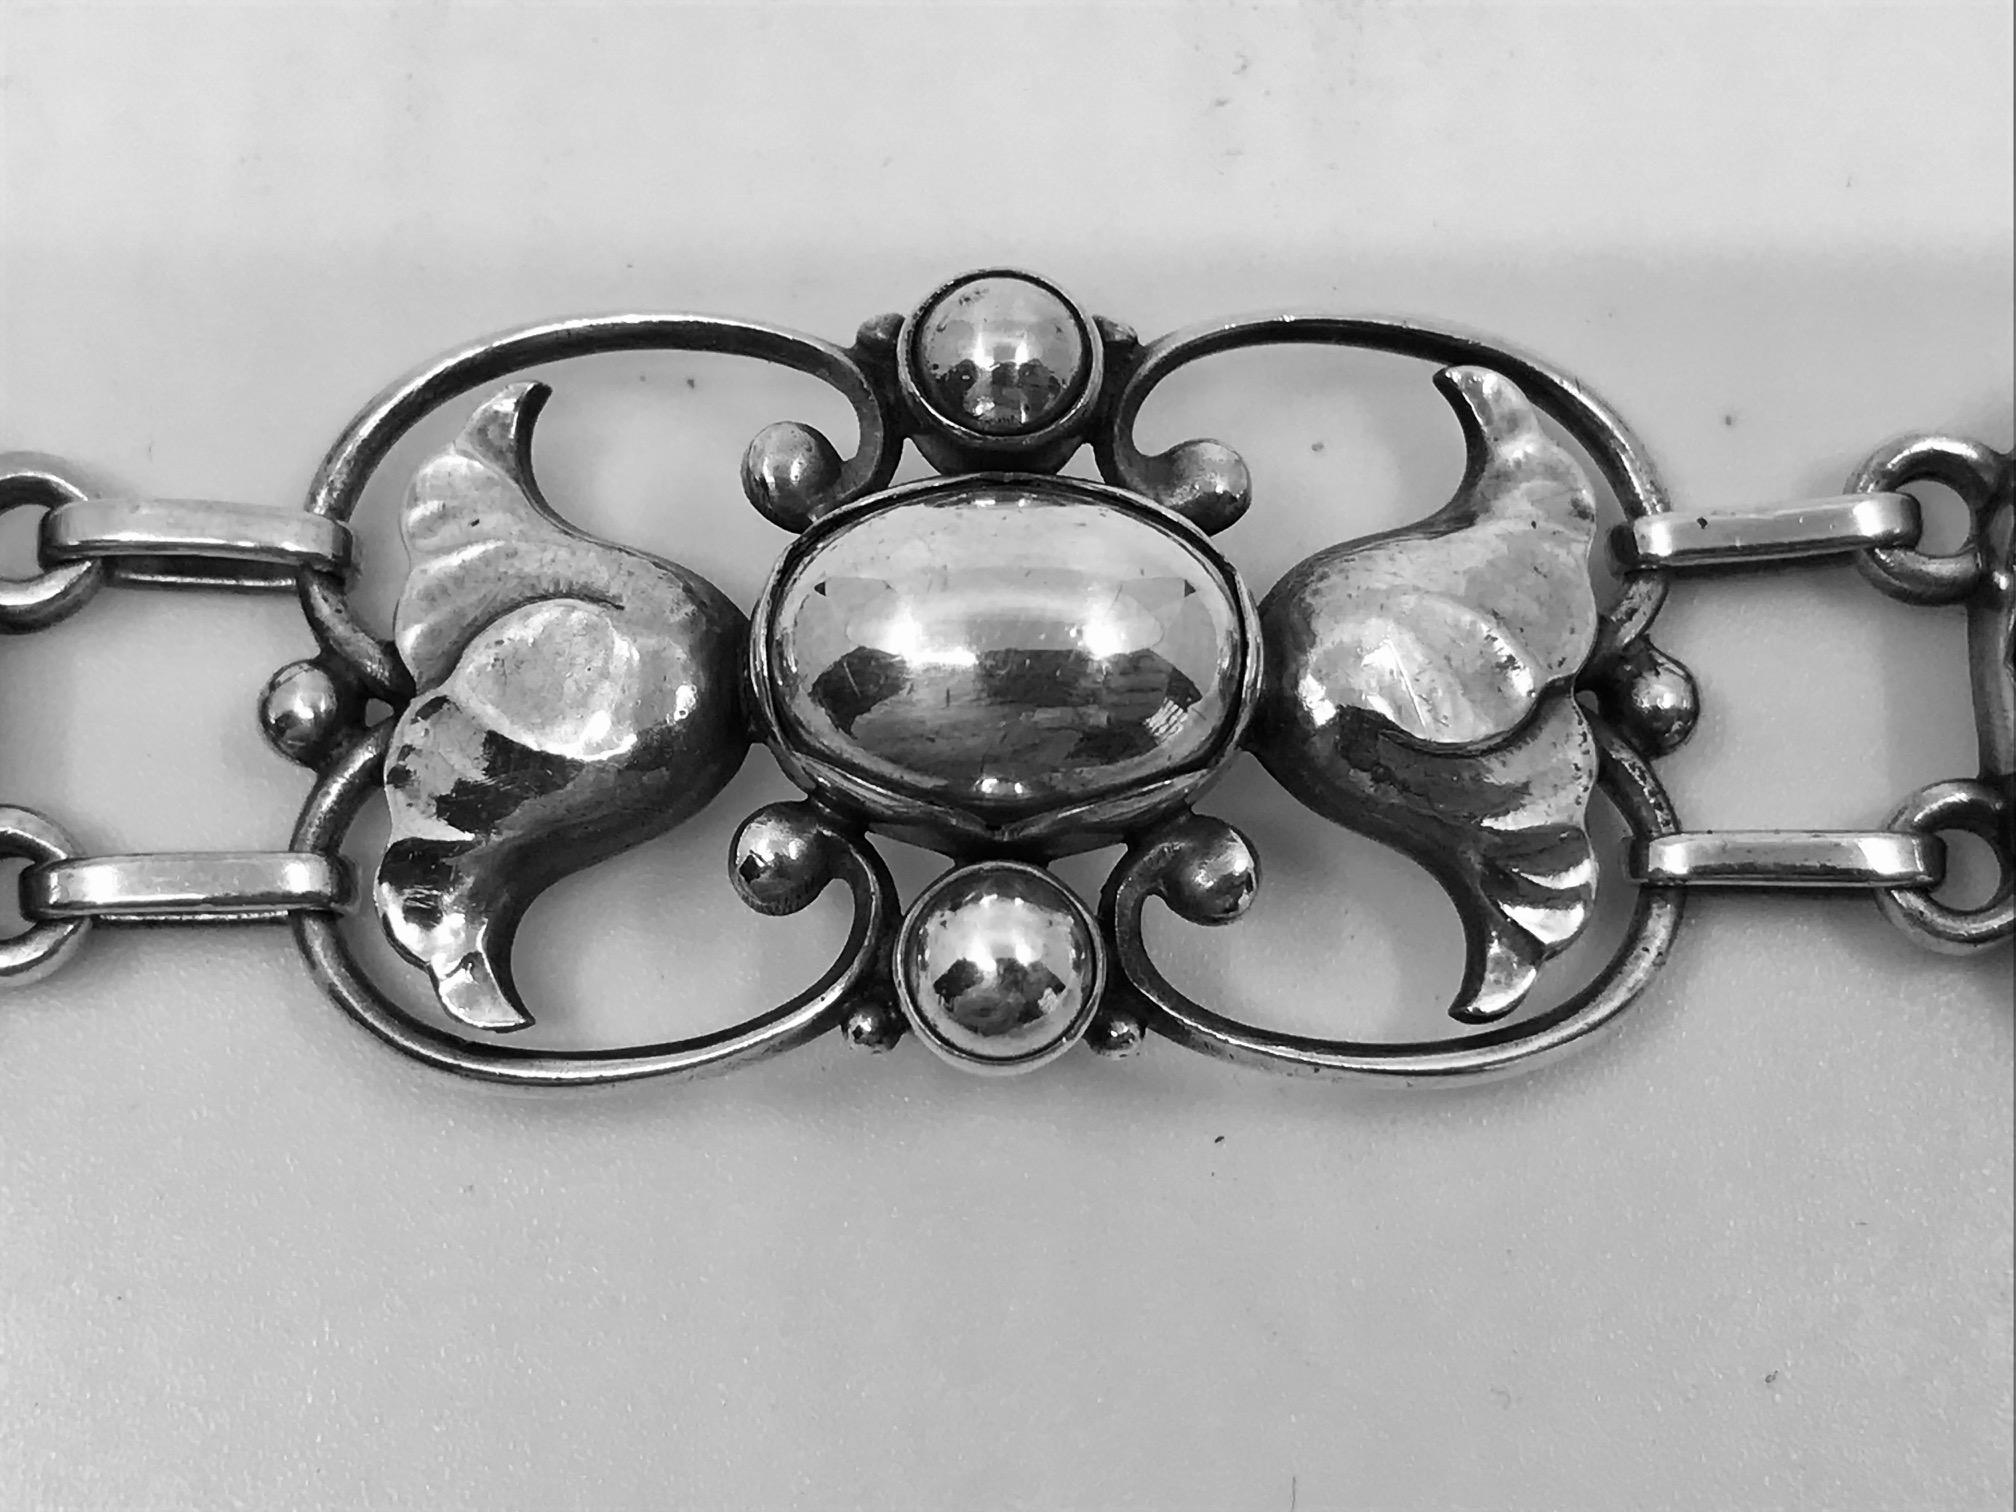 Sterling silver Georg Jensen bracelet with floral details and large silver beads, design #34 by Georg Jensen from the 1920s. The large links are curved for a better fit.

Measures 7 1/4″ in length, the links are 7/8″ (18.5cm, 2.2cm).

Post 1944